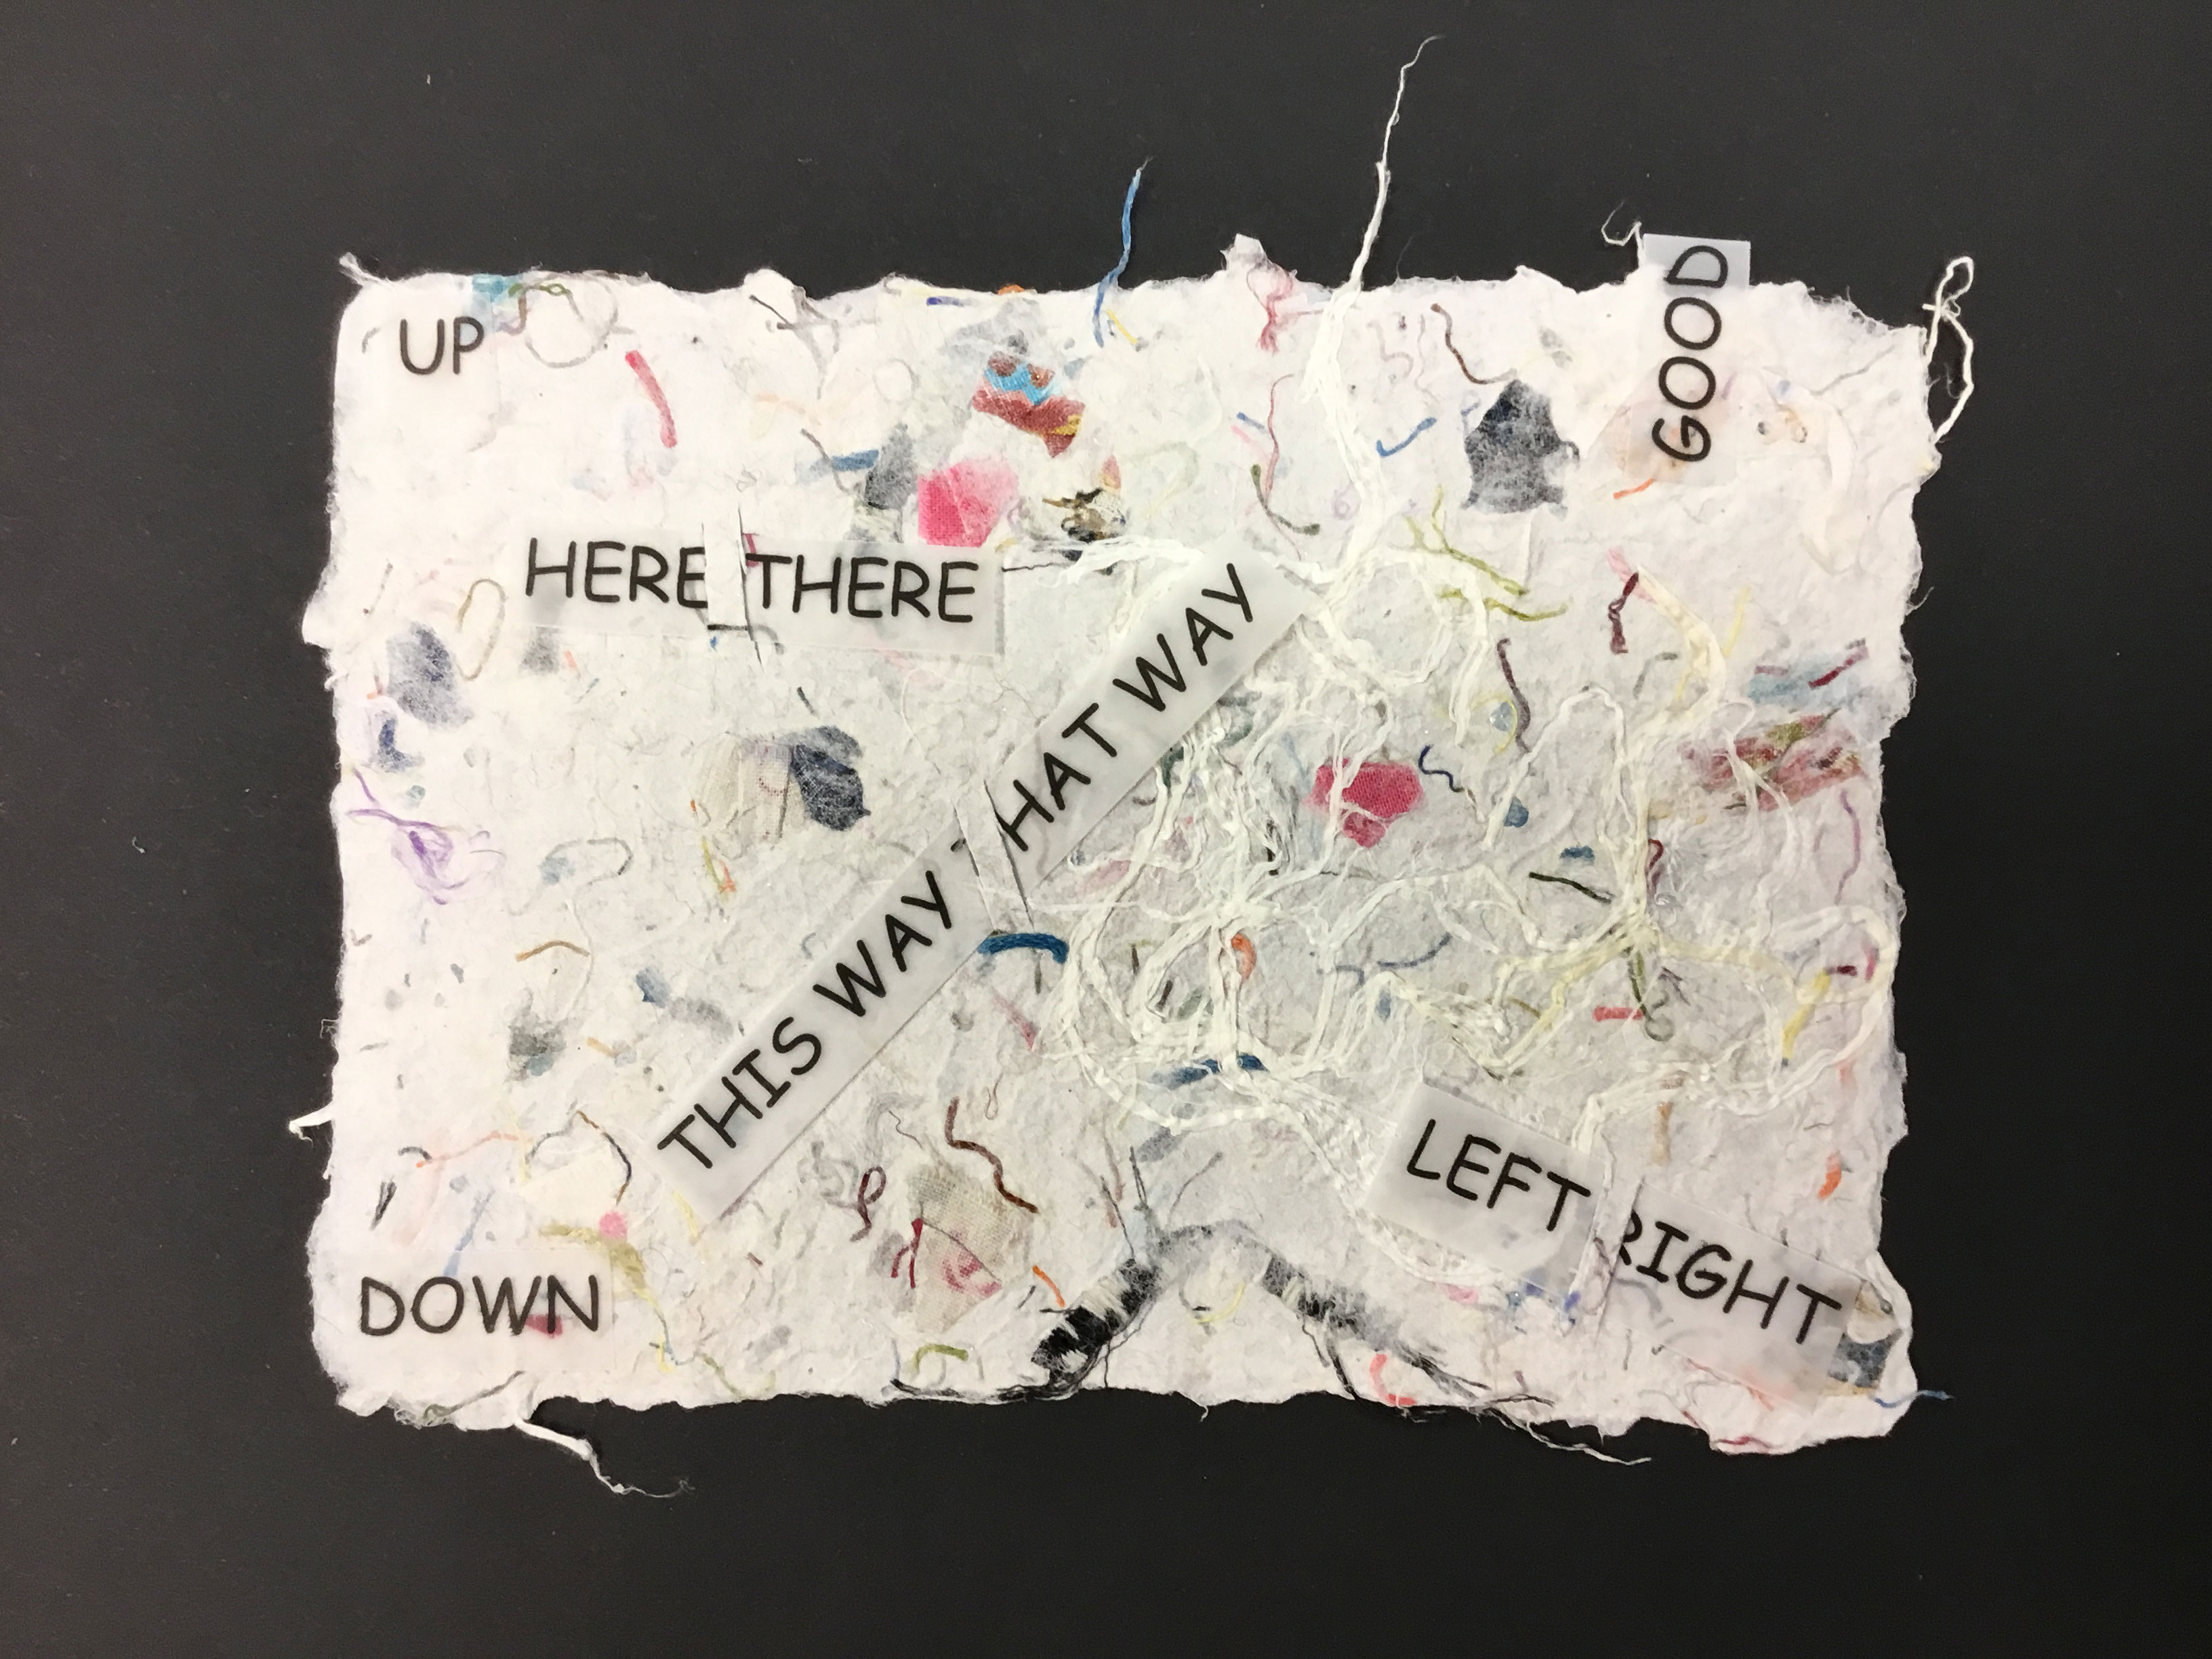 This piece, entitled “Kitchen Sink Paper”, is made of abaca and beaten kozo with colored thread inclusions and printed words like “This Way That Way” scattered throughout.